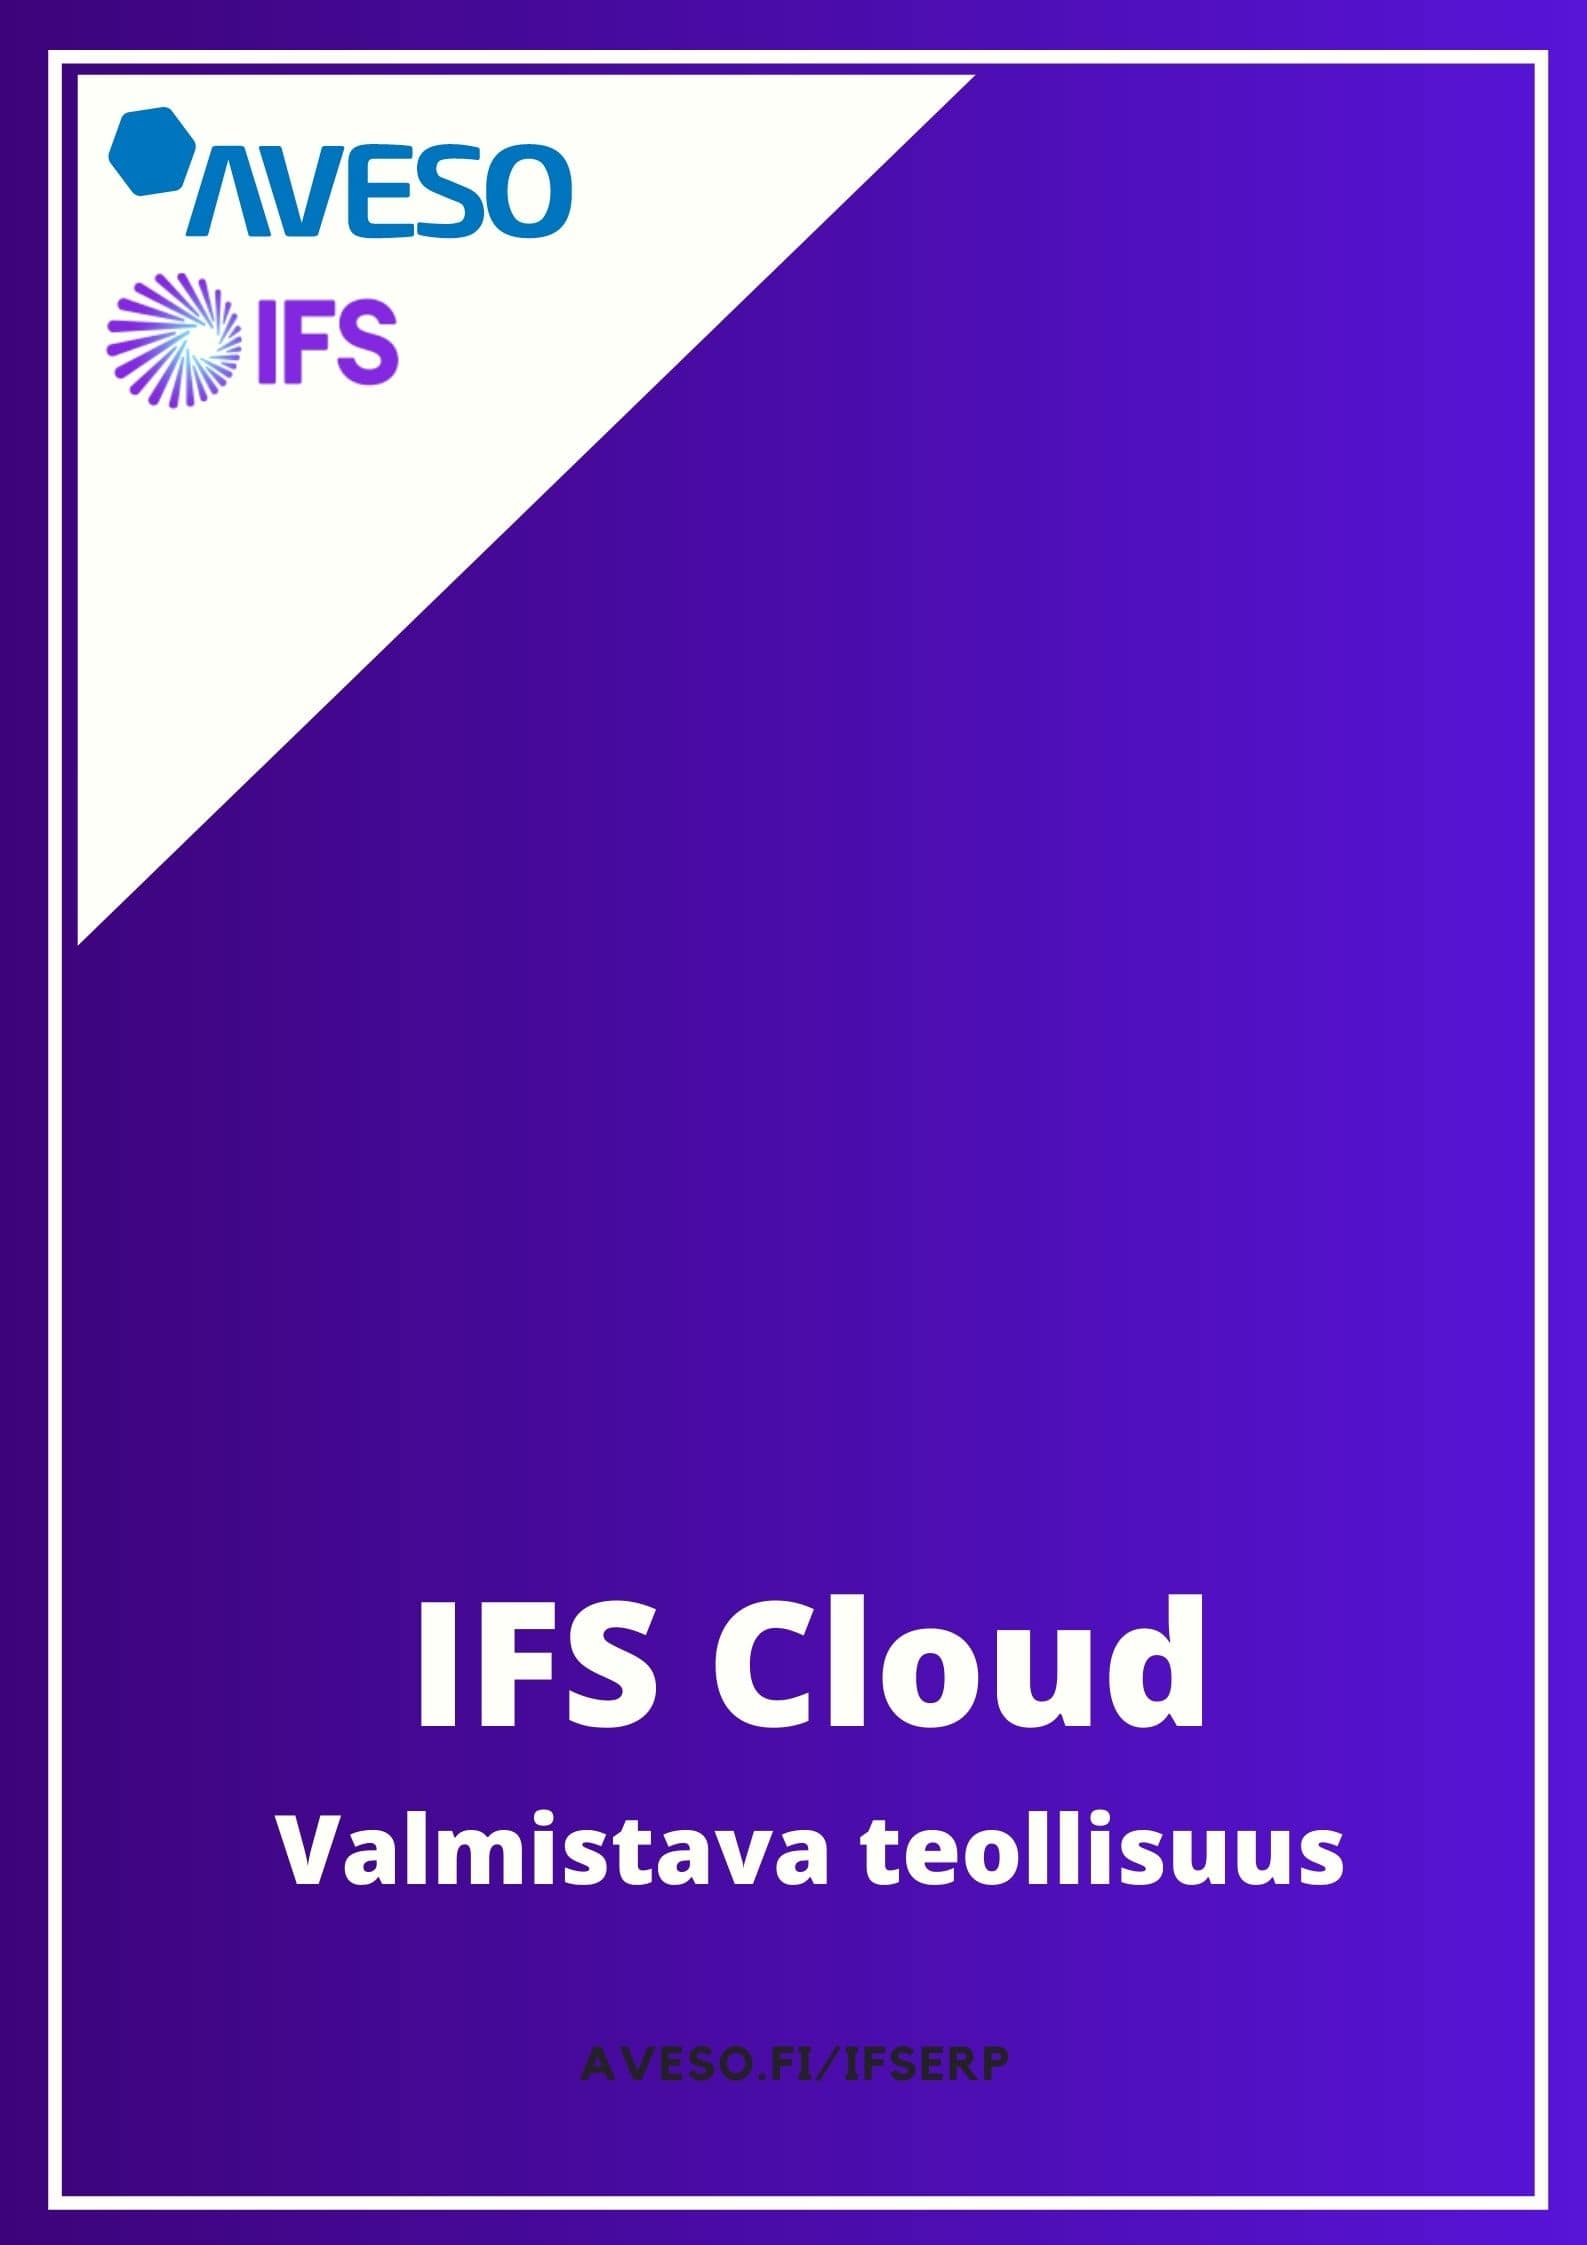 IFS Cloud for Manufacturing